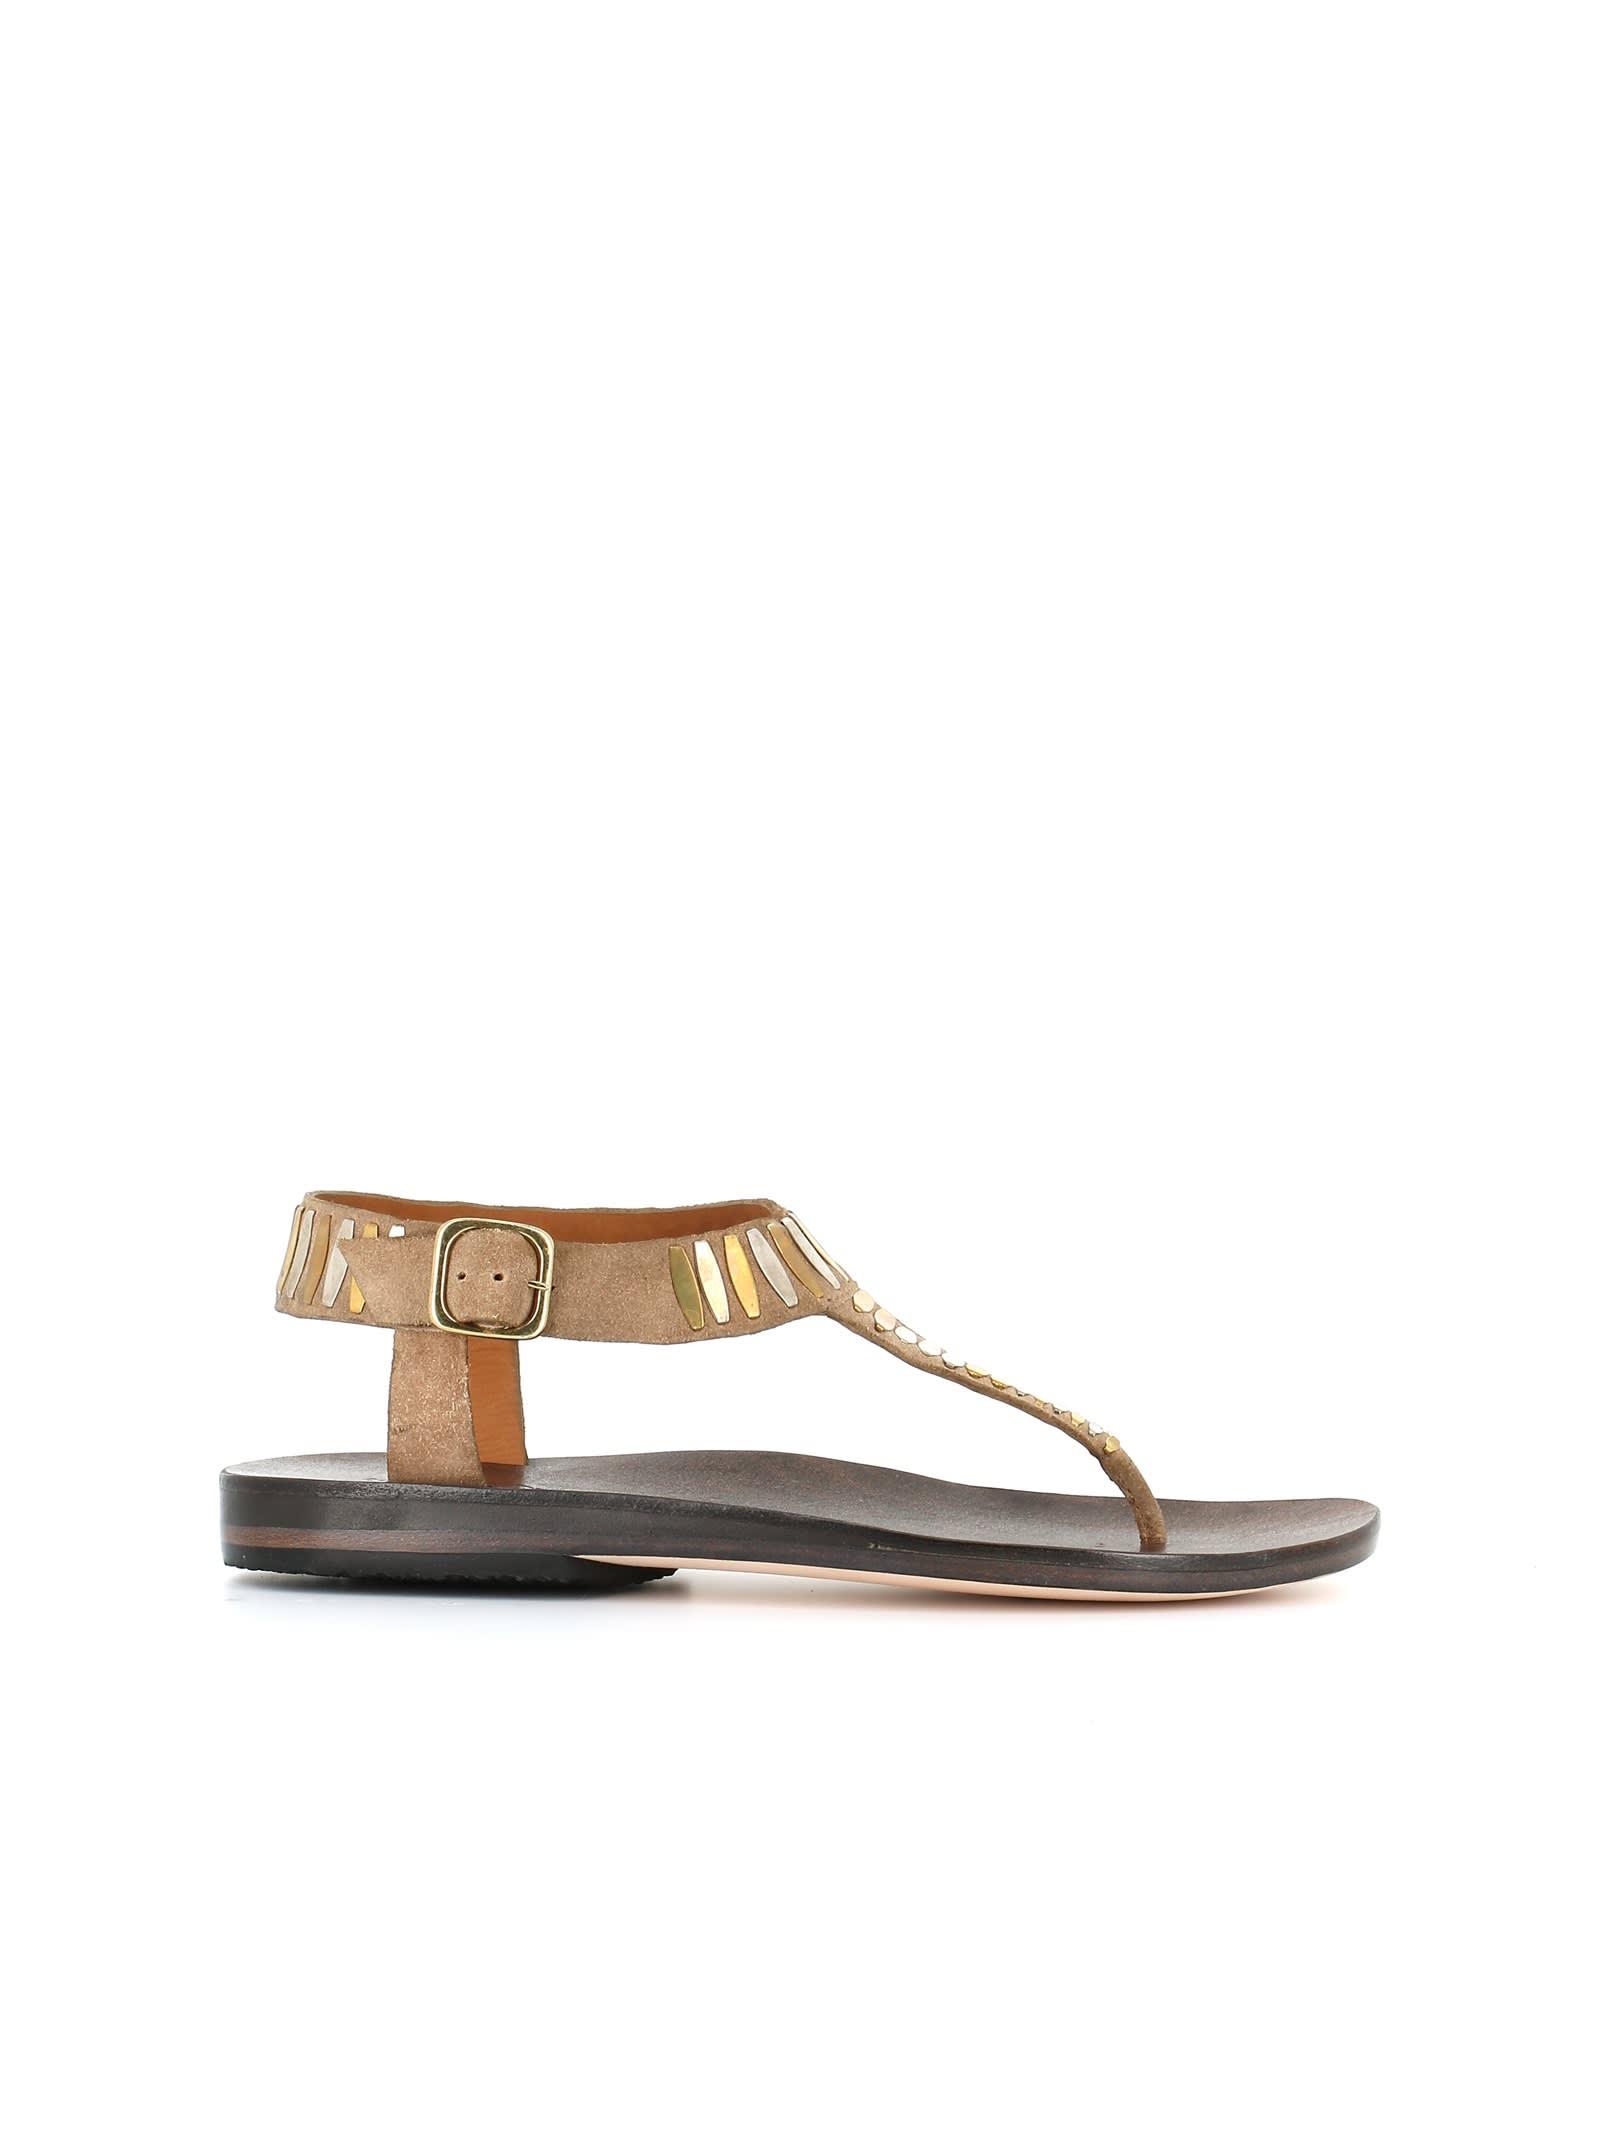 Calleen Cordero Flip-flop Cleo-sa in Natural | Lyst